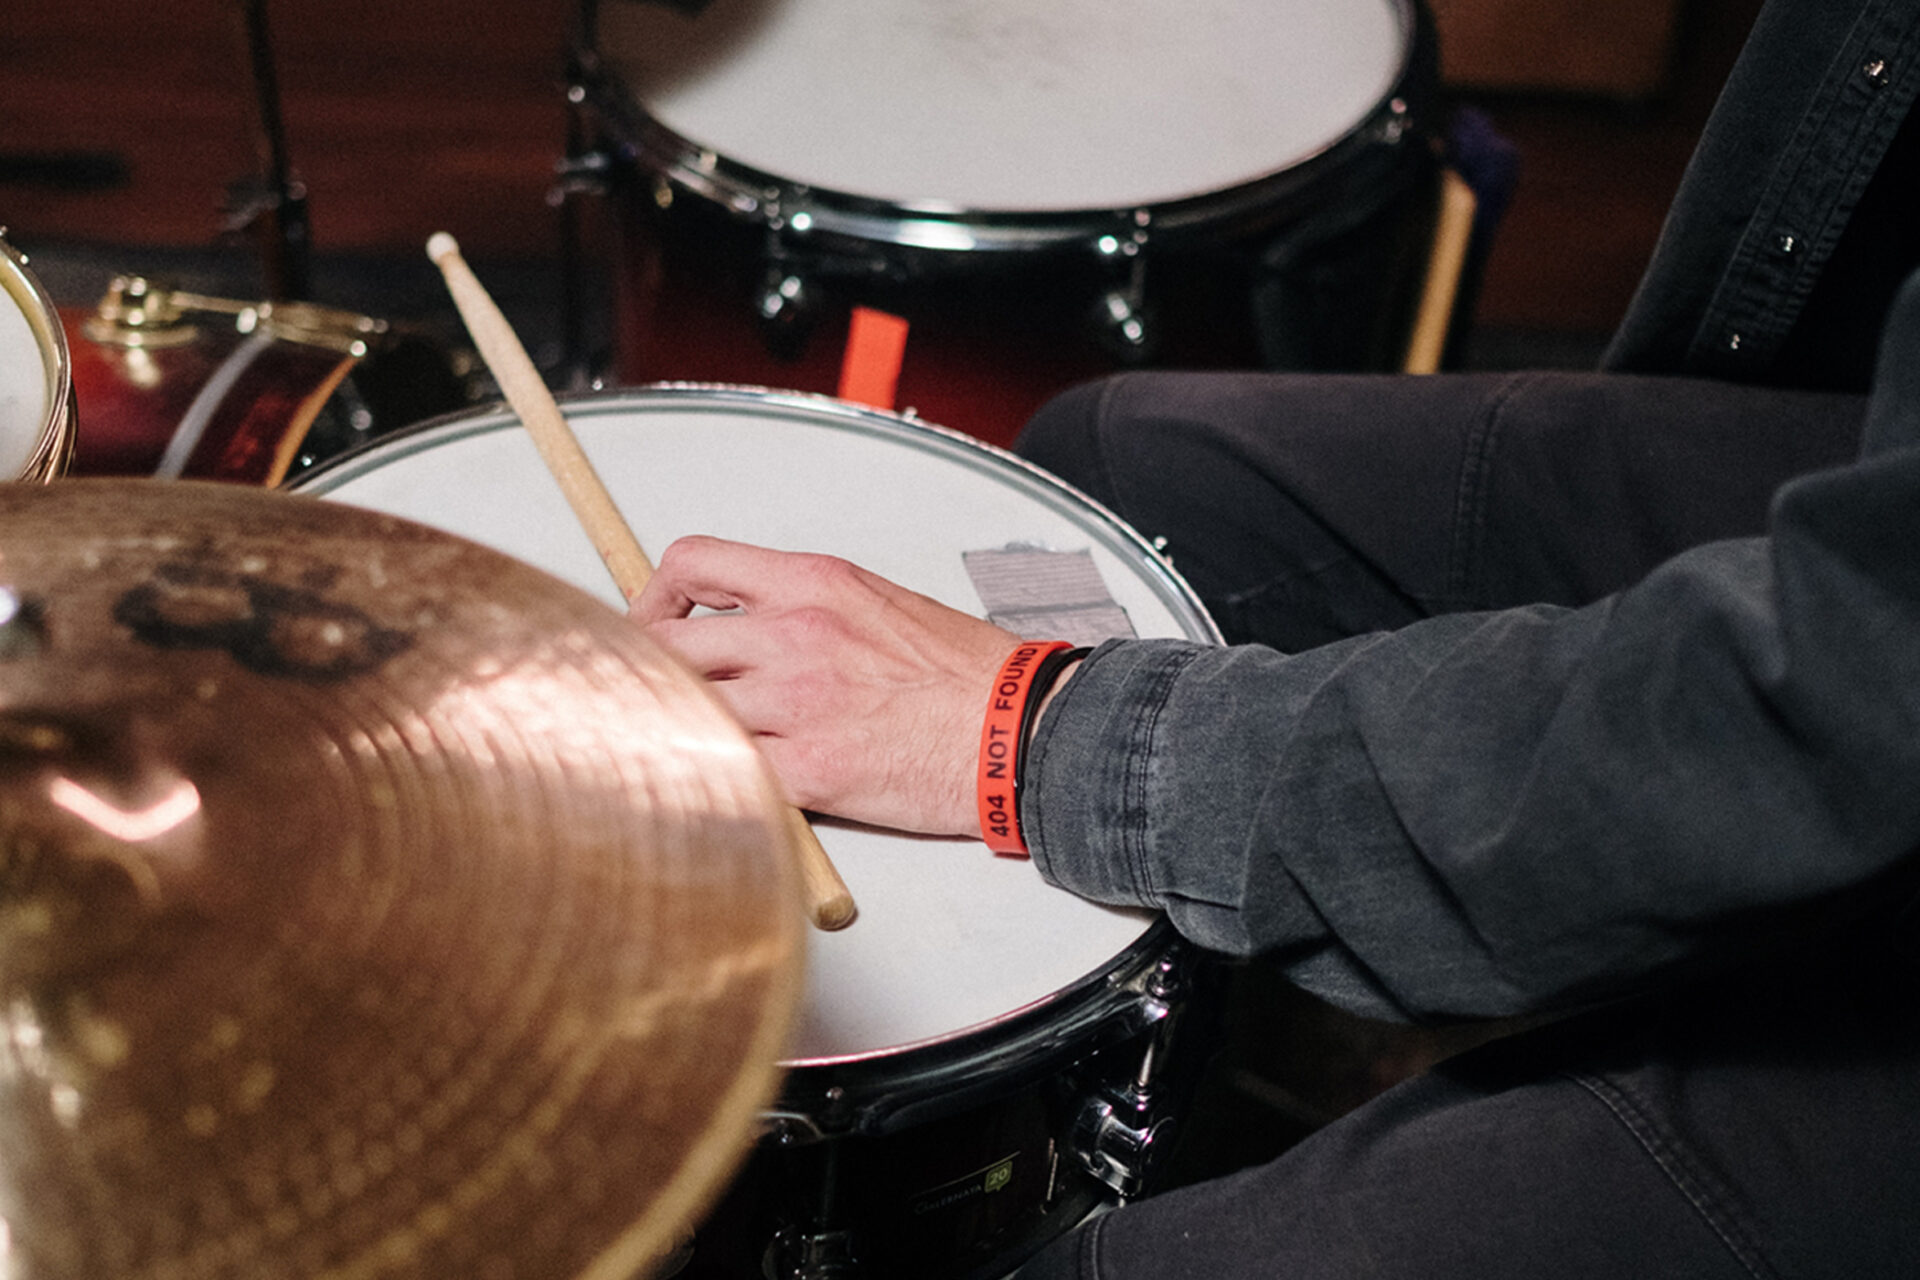 The best snare drums in: For all budgets and playing styles